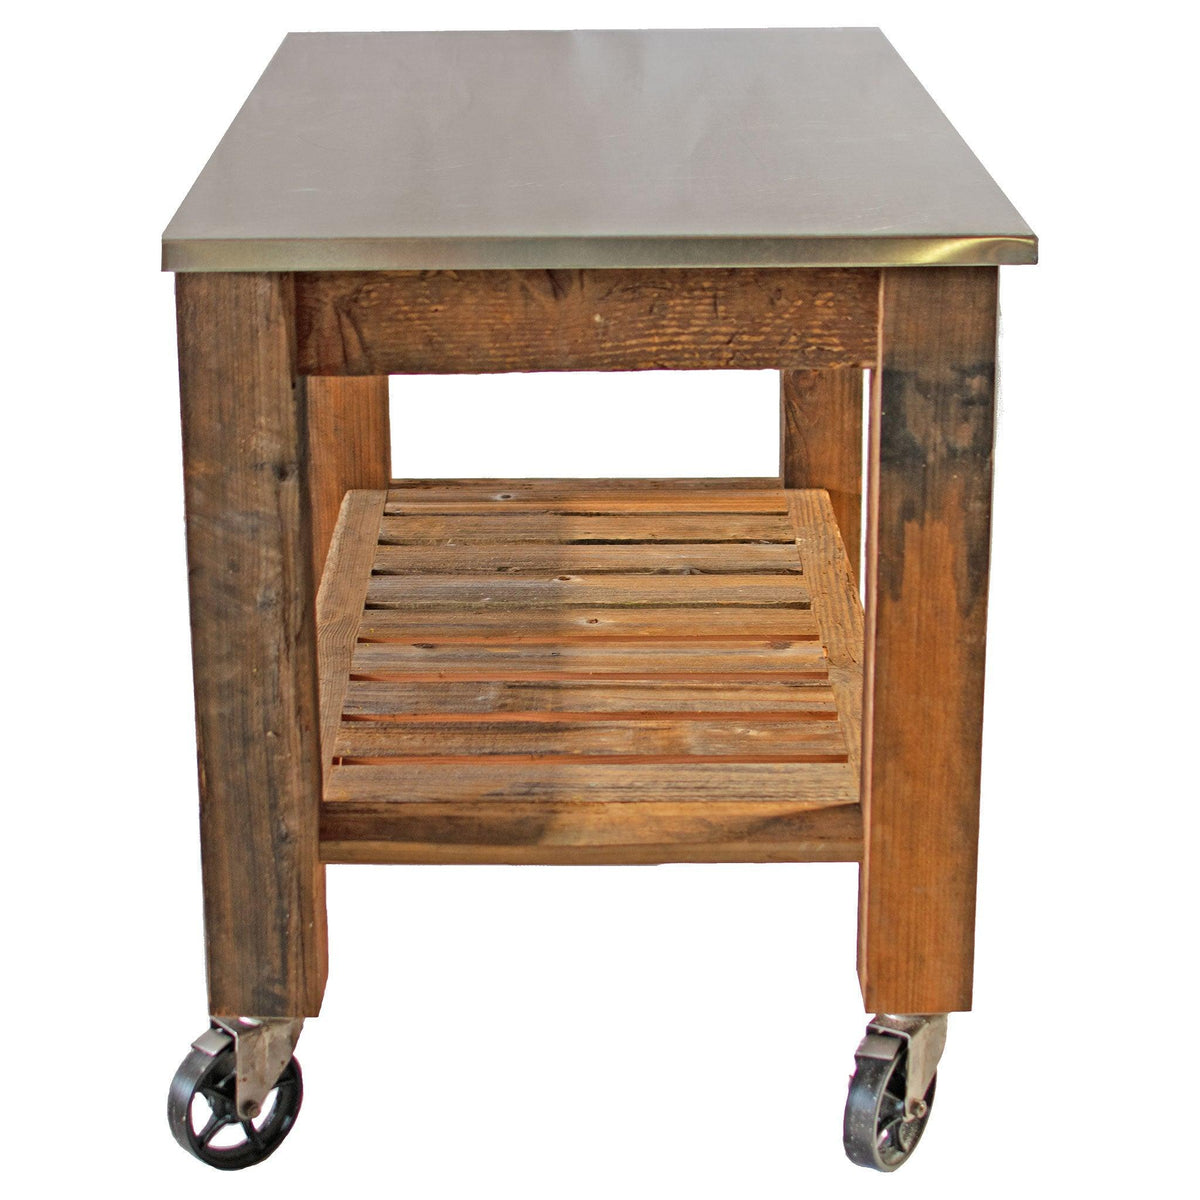 Side of Lee Display's Redwood Potting Table Rolling Cart with 6in Vintage Casters without Hardware Included on sale now at leedisplay.com